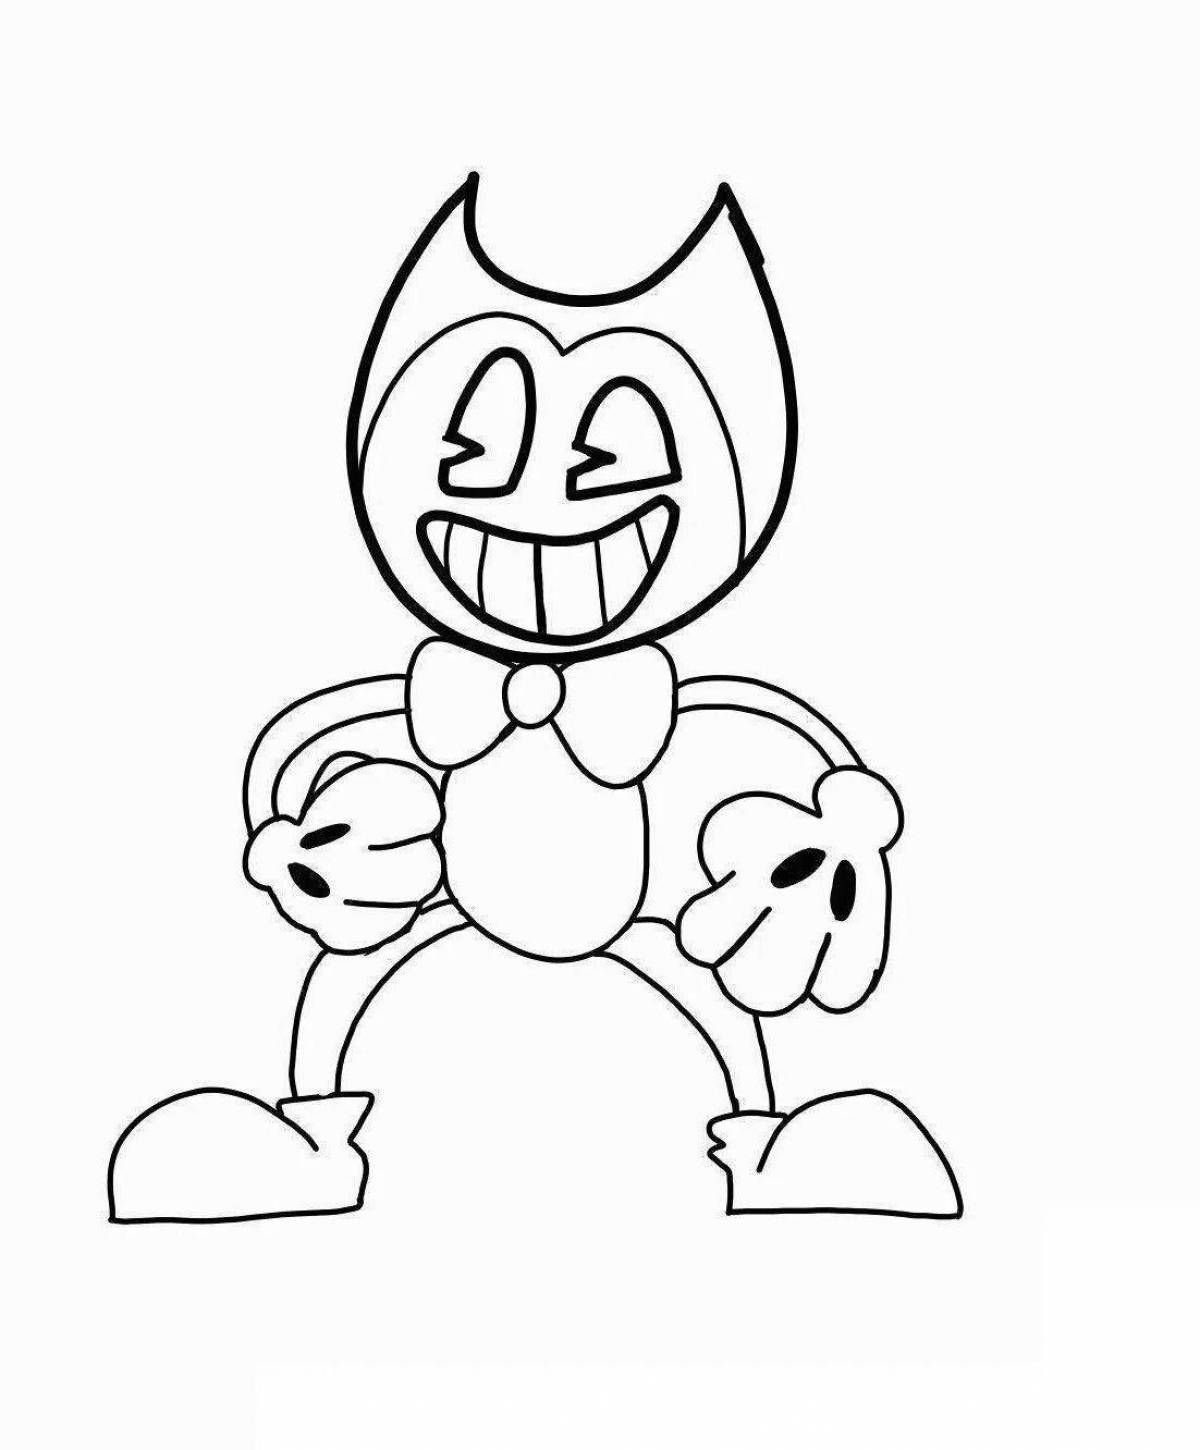 Charming bendy coloring book